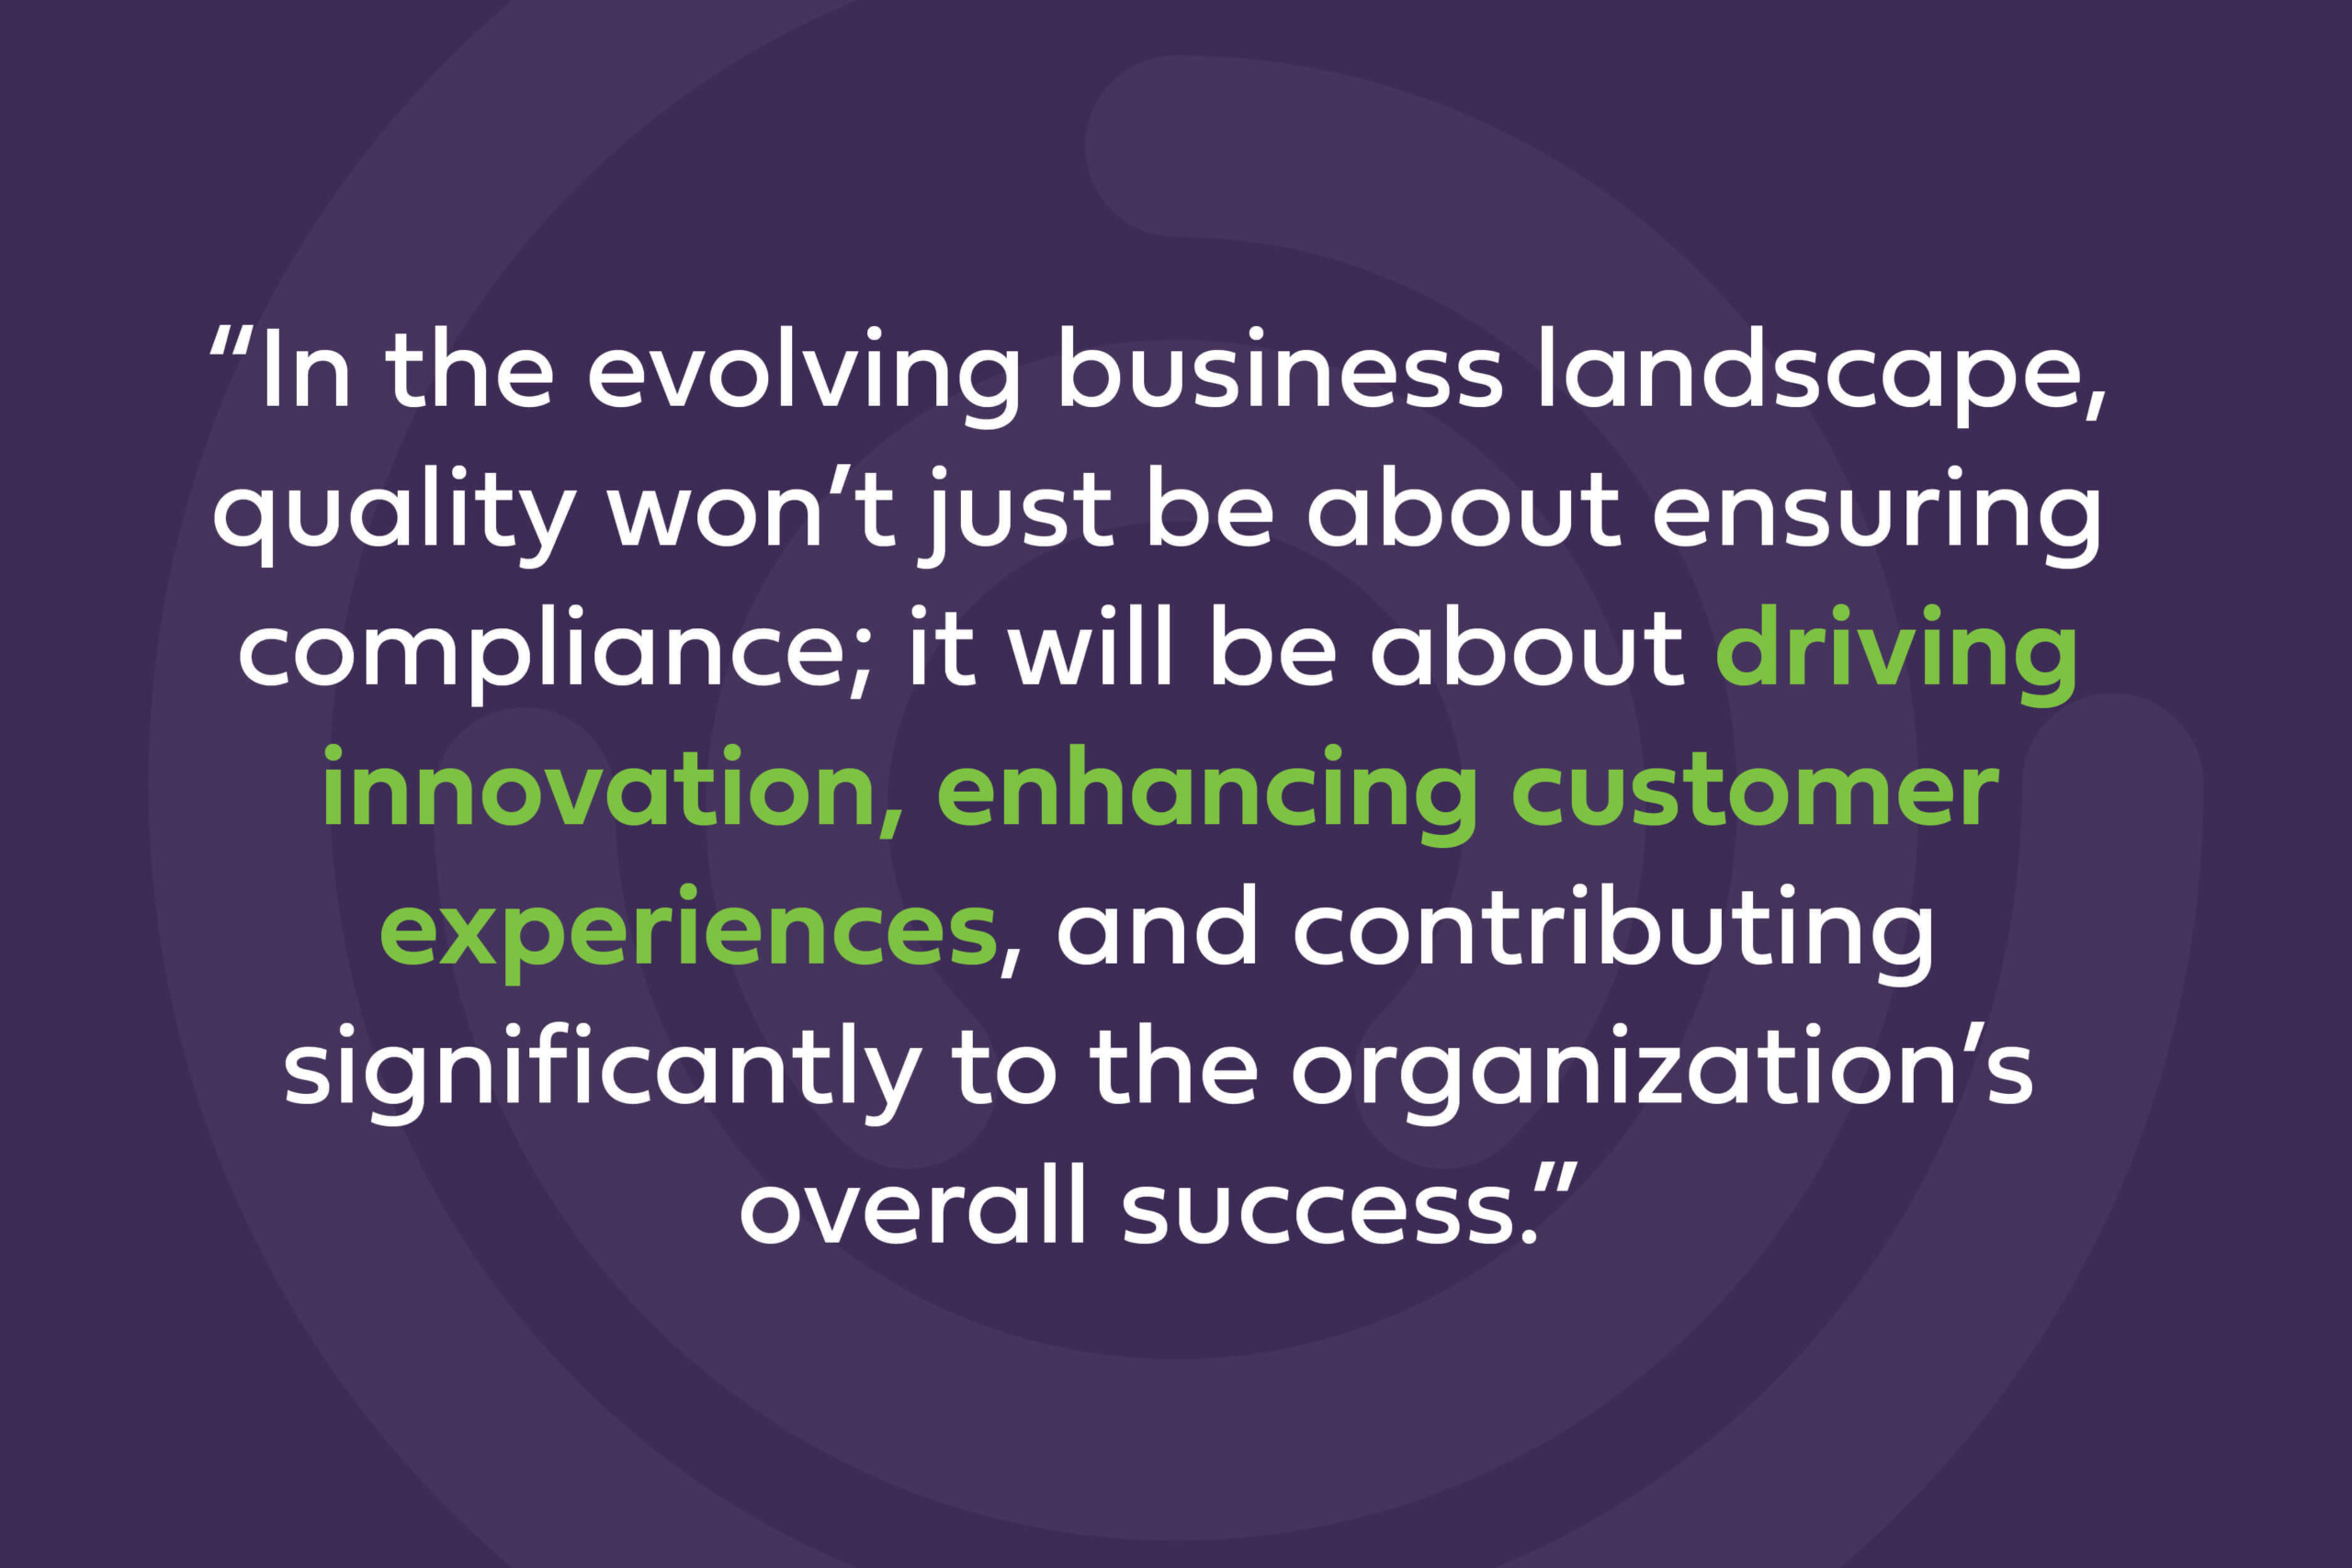 In the evolving business landscape, quality won't just be about ensuring compliance; it will be about driving innovation, enhancing customer experiences, and contributing significantly to the organization's overall success. 